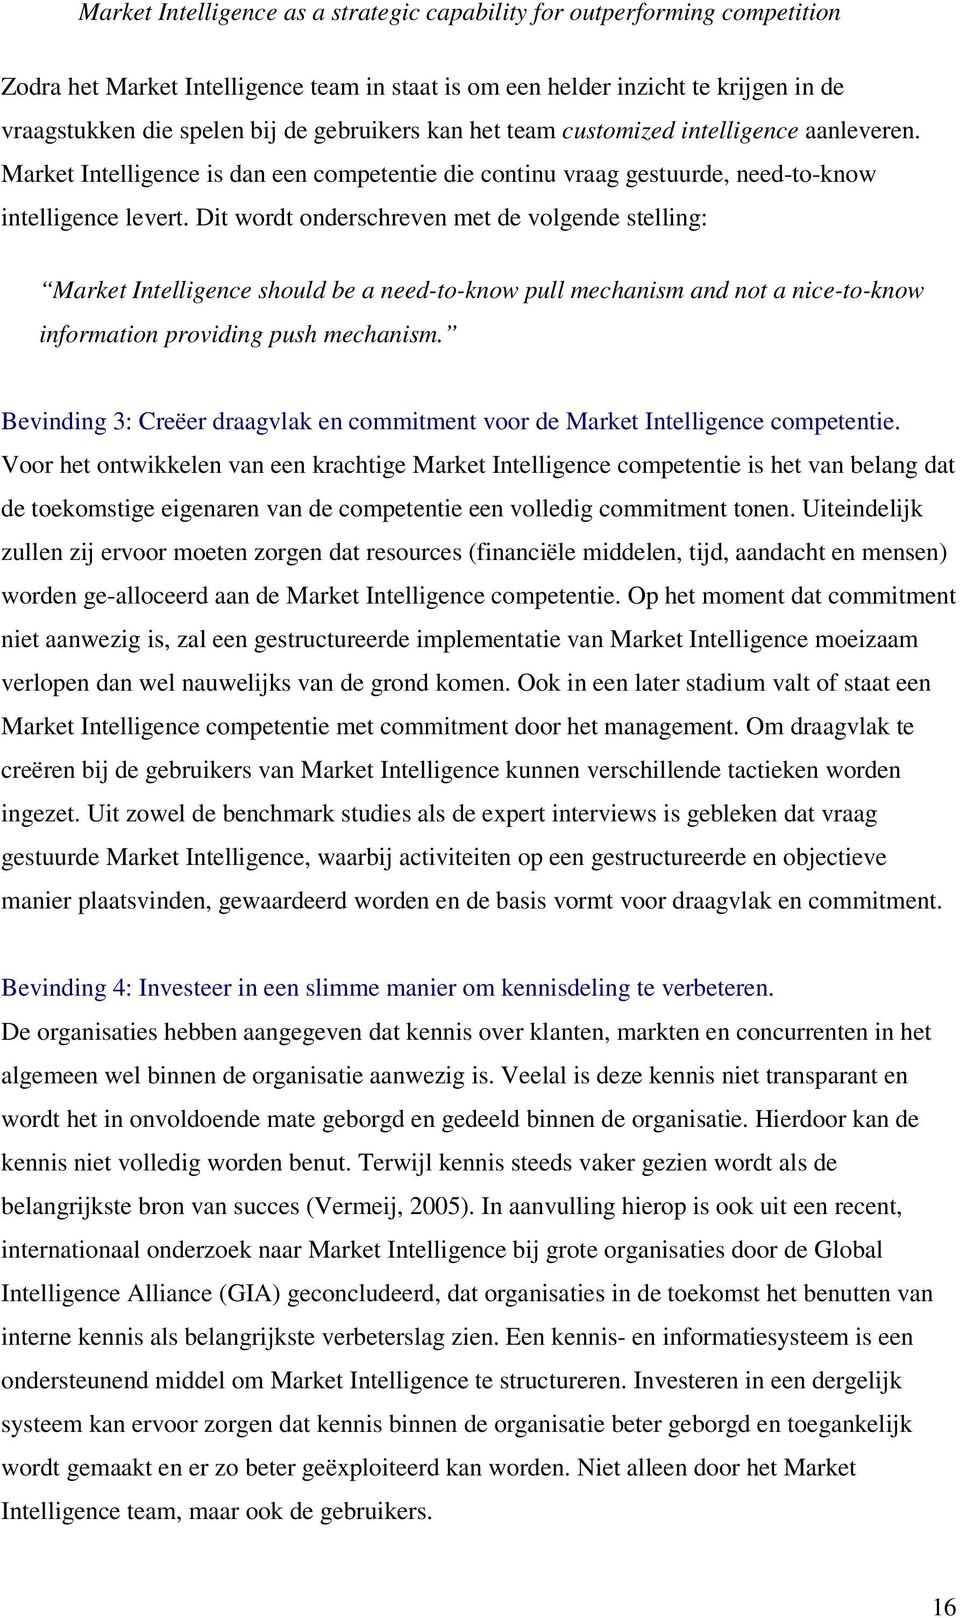 Dit wordt onderschreven met de volgende stelling: Market Intelligence should be a need-to-know pull mechanism and not a nice-to-know information providing push mechanism.